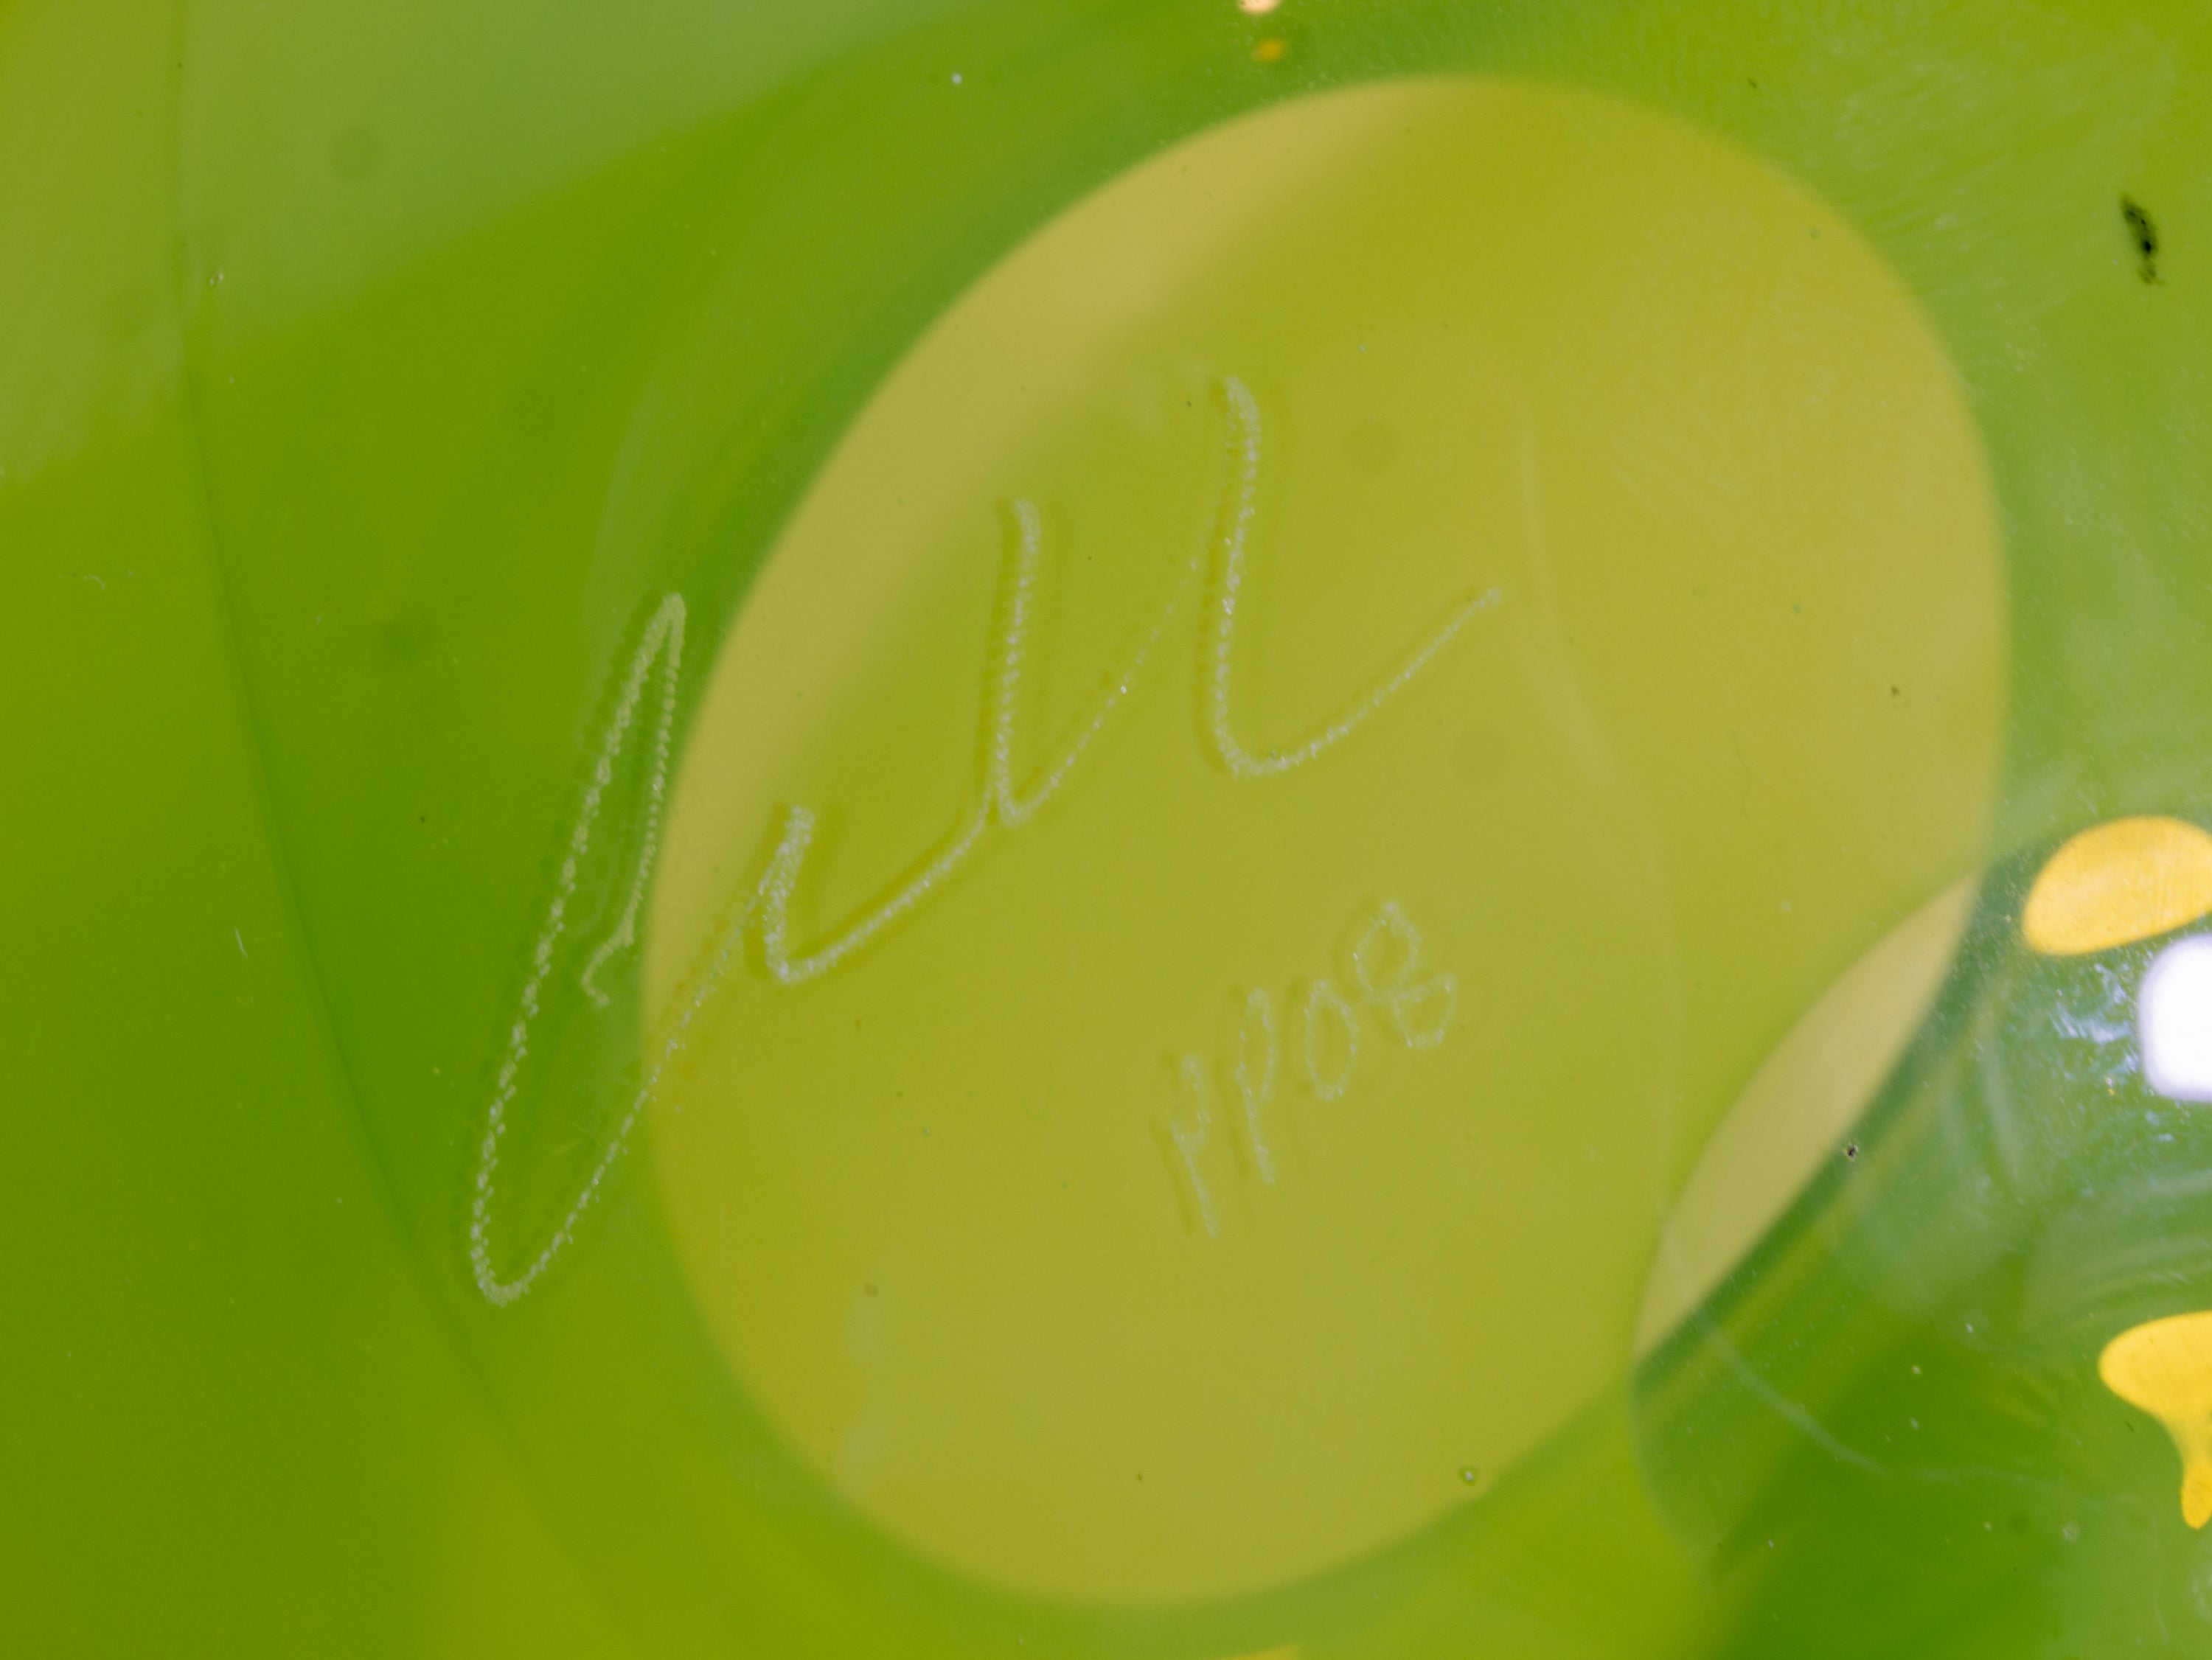 Close up of Dale Chihuly’s signature on glass